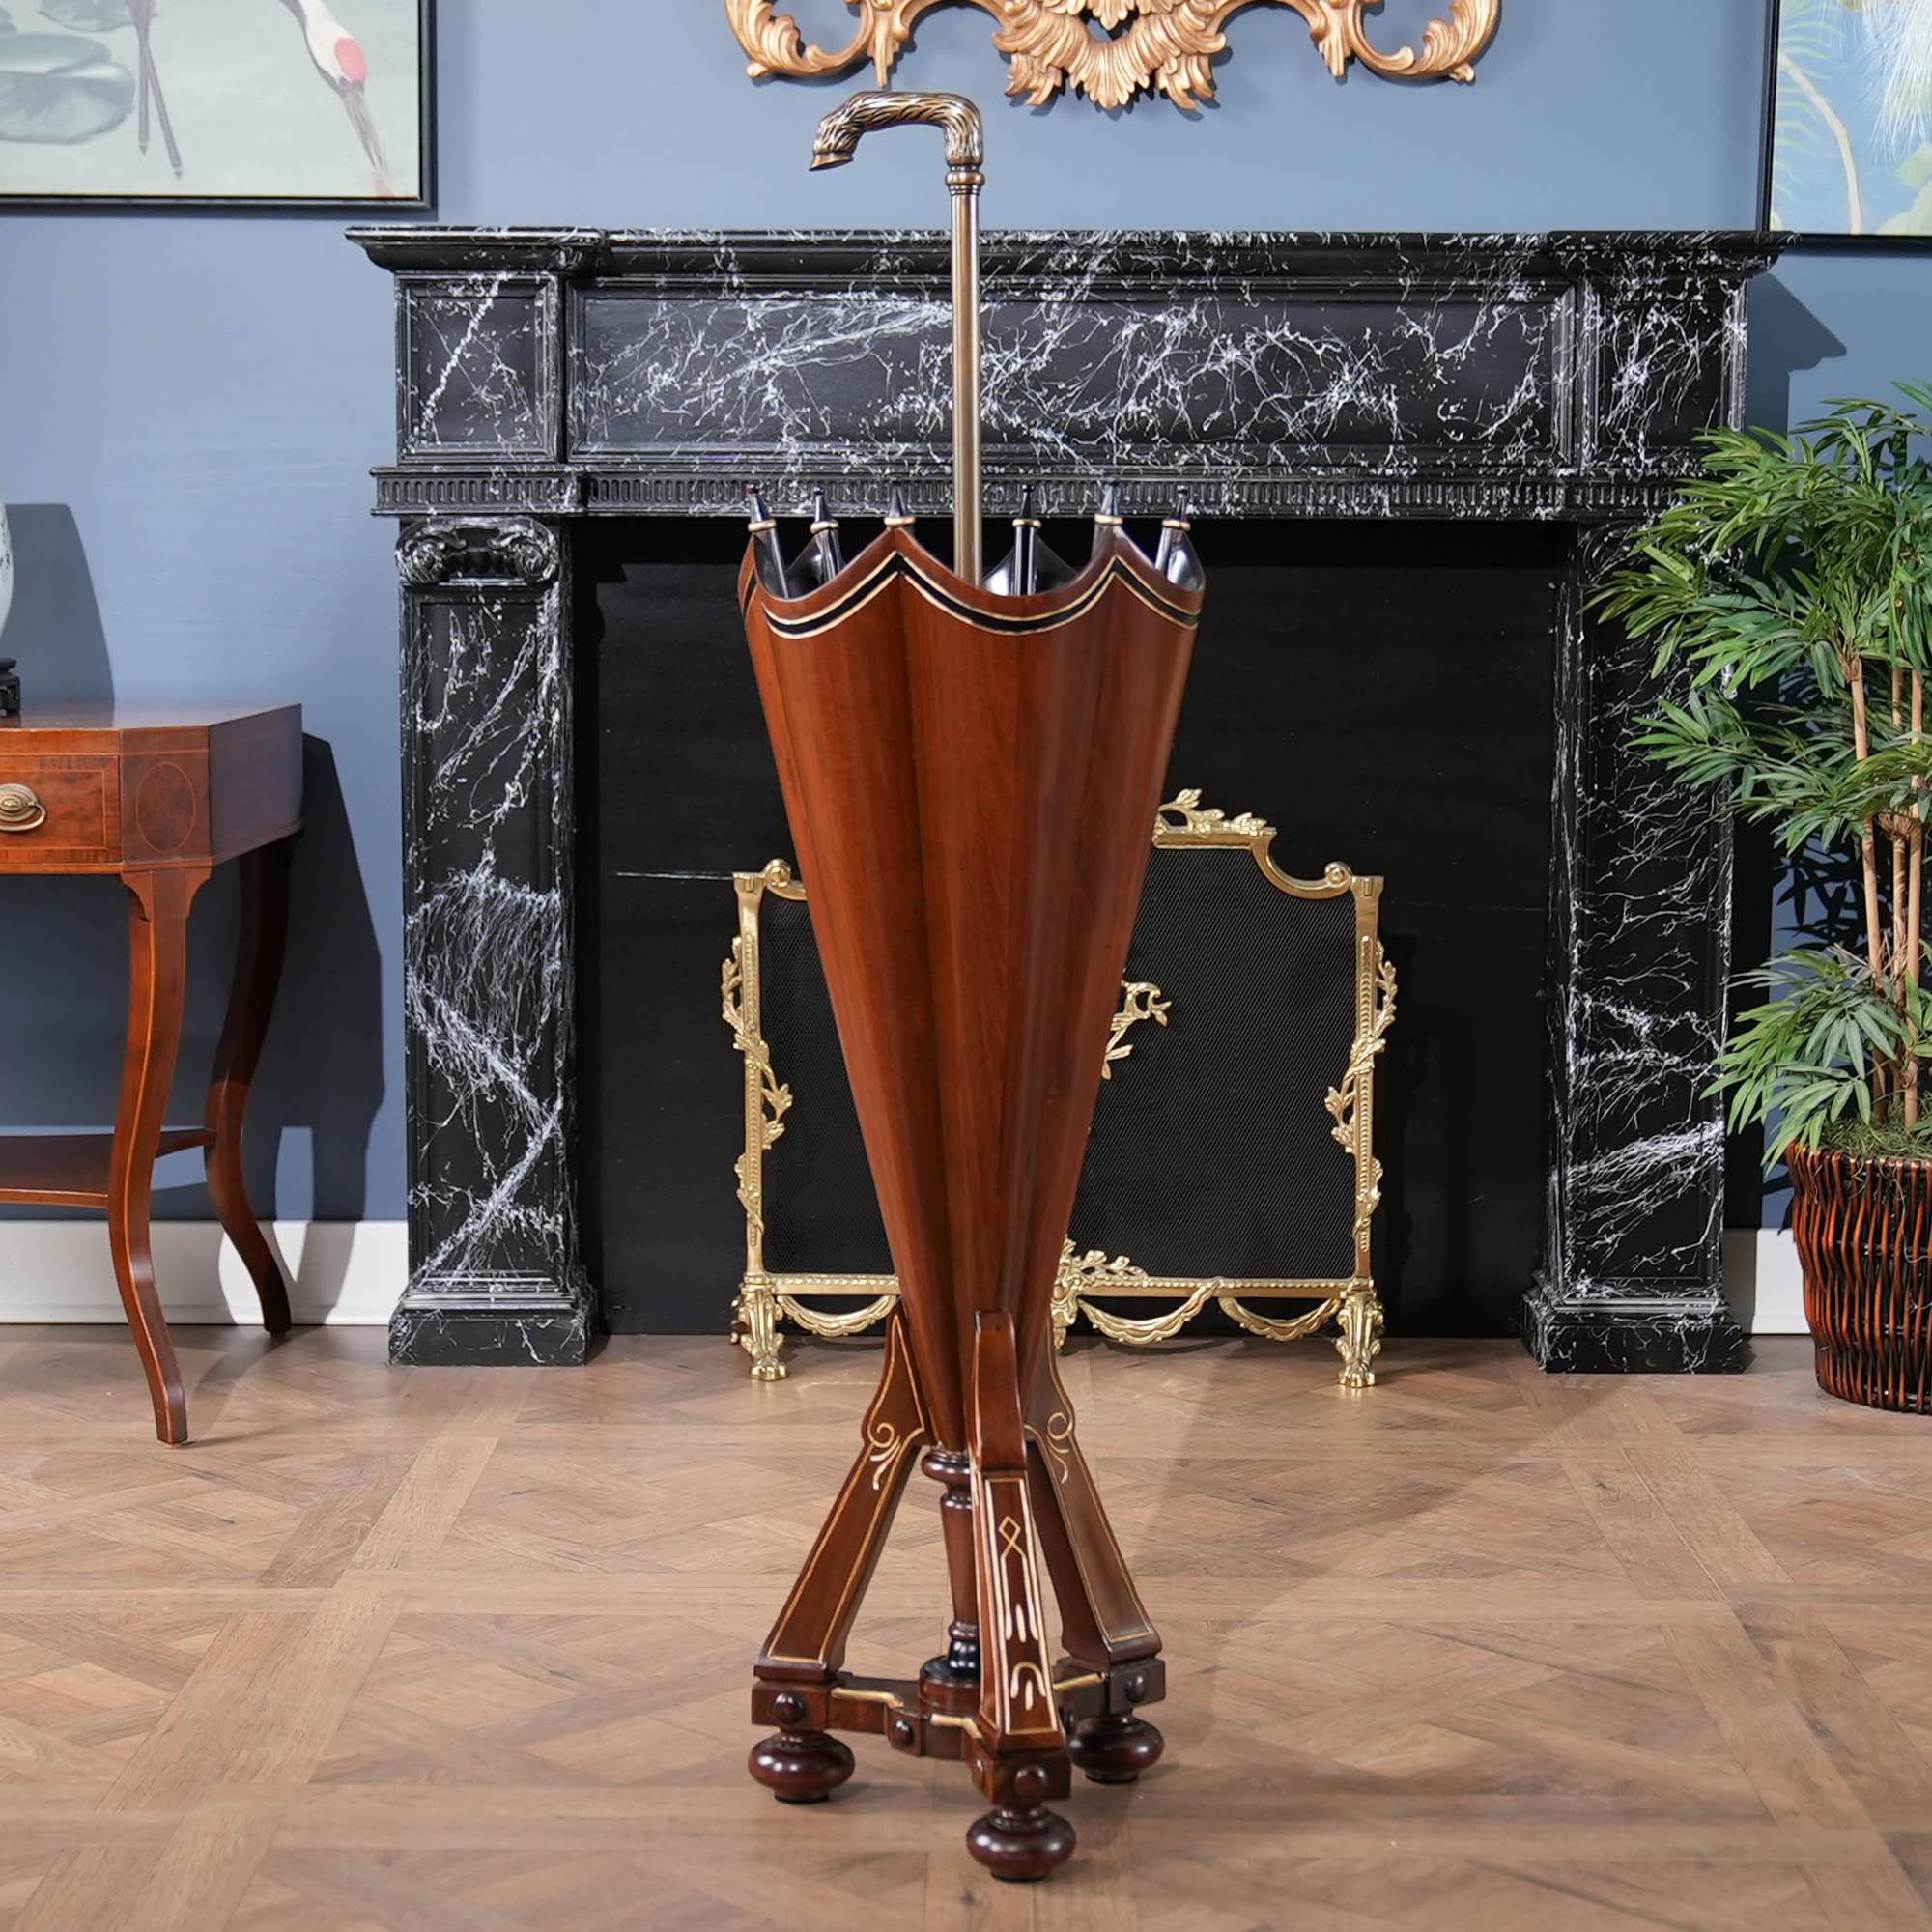 A wooden Umbrella Stand shaped like an umbrella. One of the rarest of antiques this is the Niagara Furniture version of a Mahogany and Brass Umbrella Stand. An umbrella shaped umbrella holder produced from the finest quality solid mahogany hardwoods